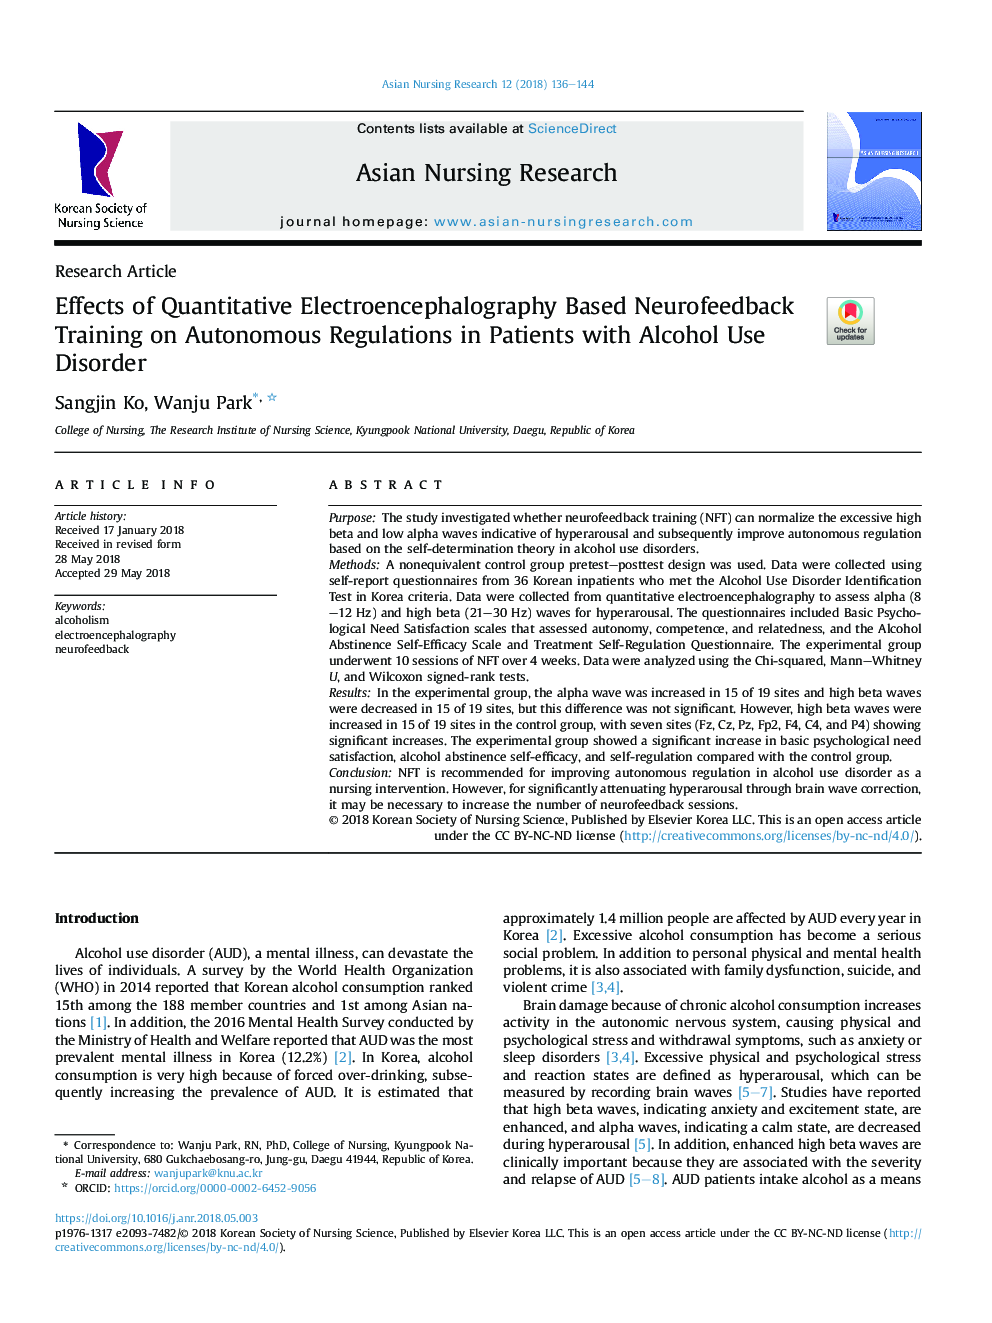 Effects of Quantitative Electroencephalography Based Neurofeedback Training on Autonomous Regulations in Patients with Alcohol Use Disorder